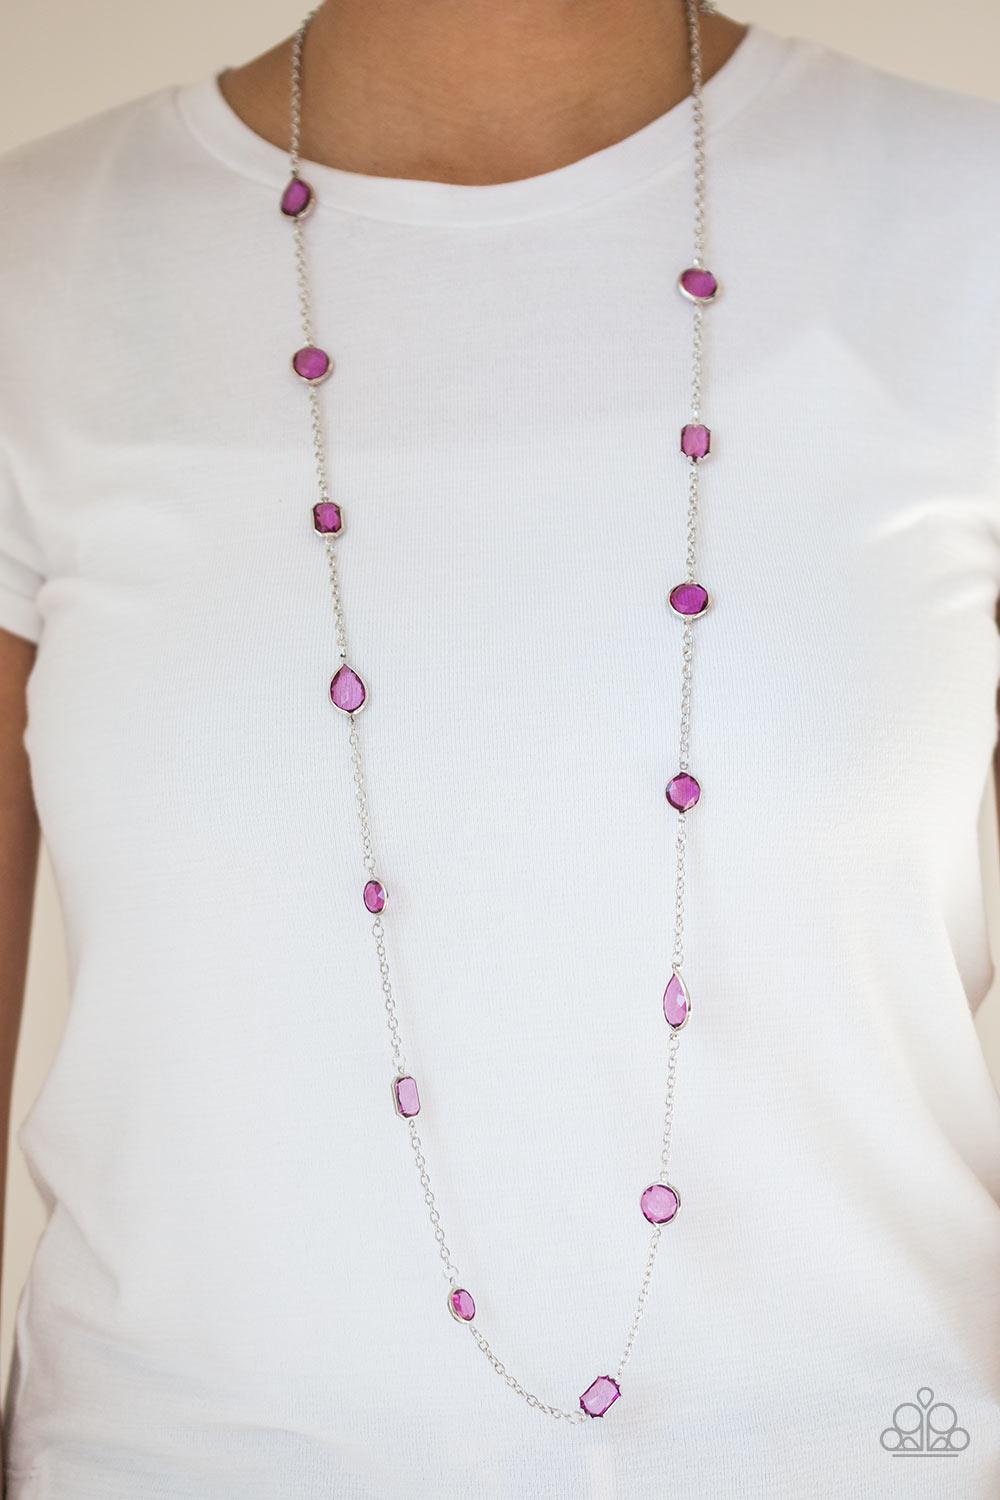 Glassy Glamorous Purple and Silver Necklace - Paparazzi Accessories - model -CarasShop.com - $5 Jewelry by Cara Jewels